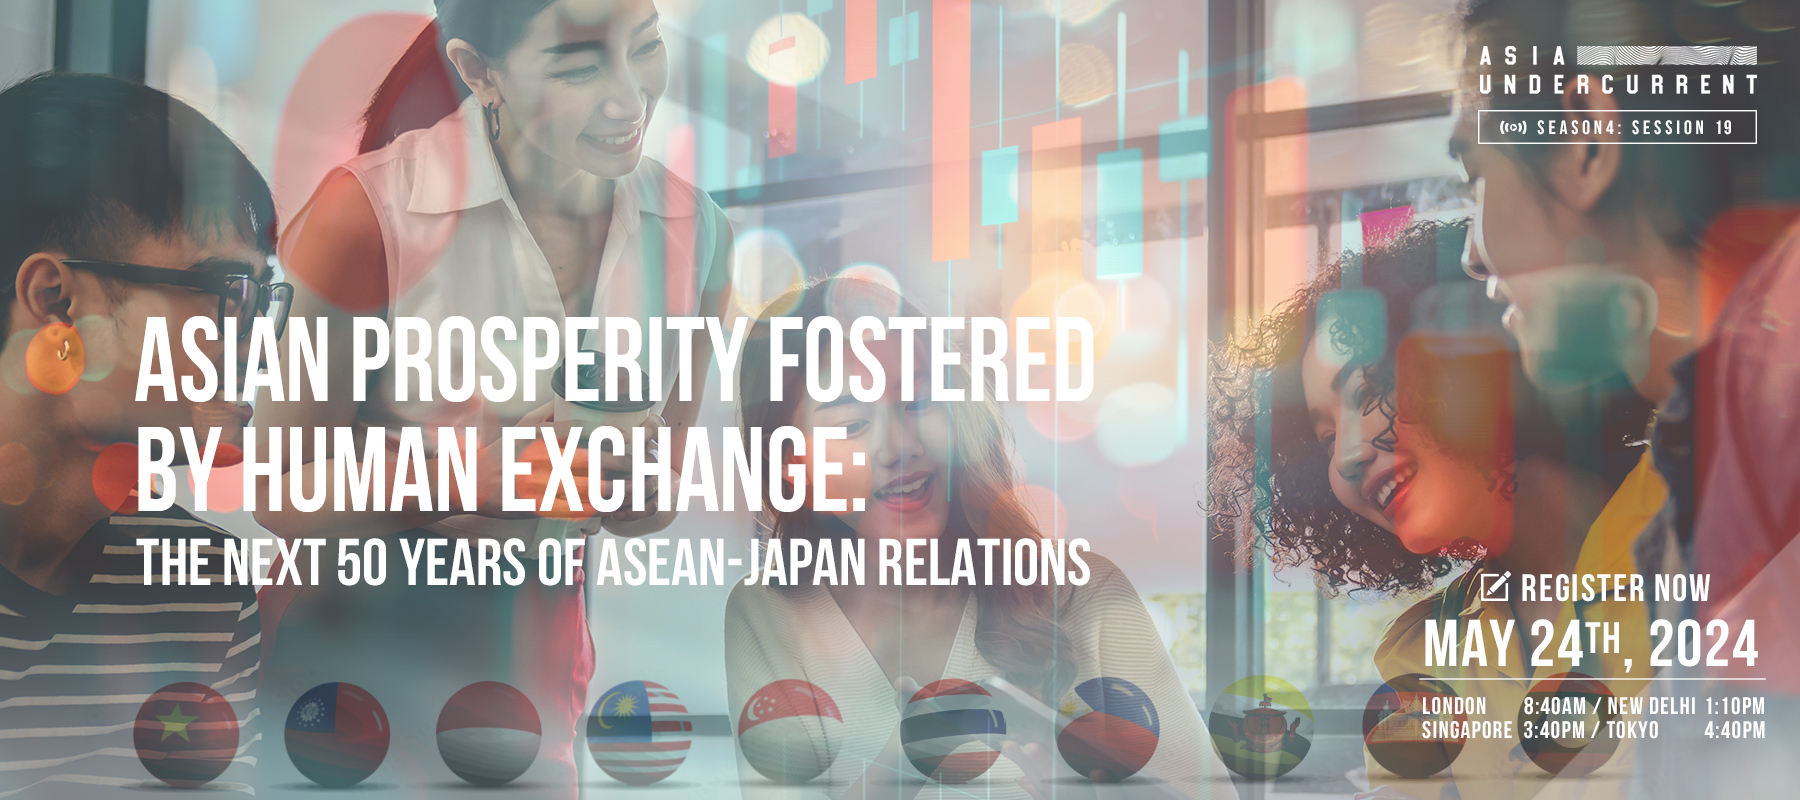 Asian Prosperity Fostered by Human Exchange: The Next 50 Years of ASEAN-Japan Relations